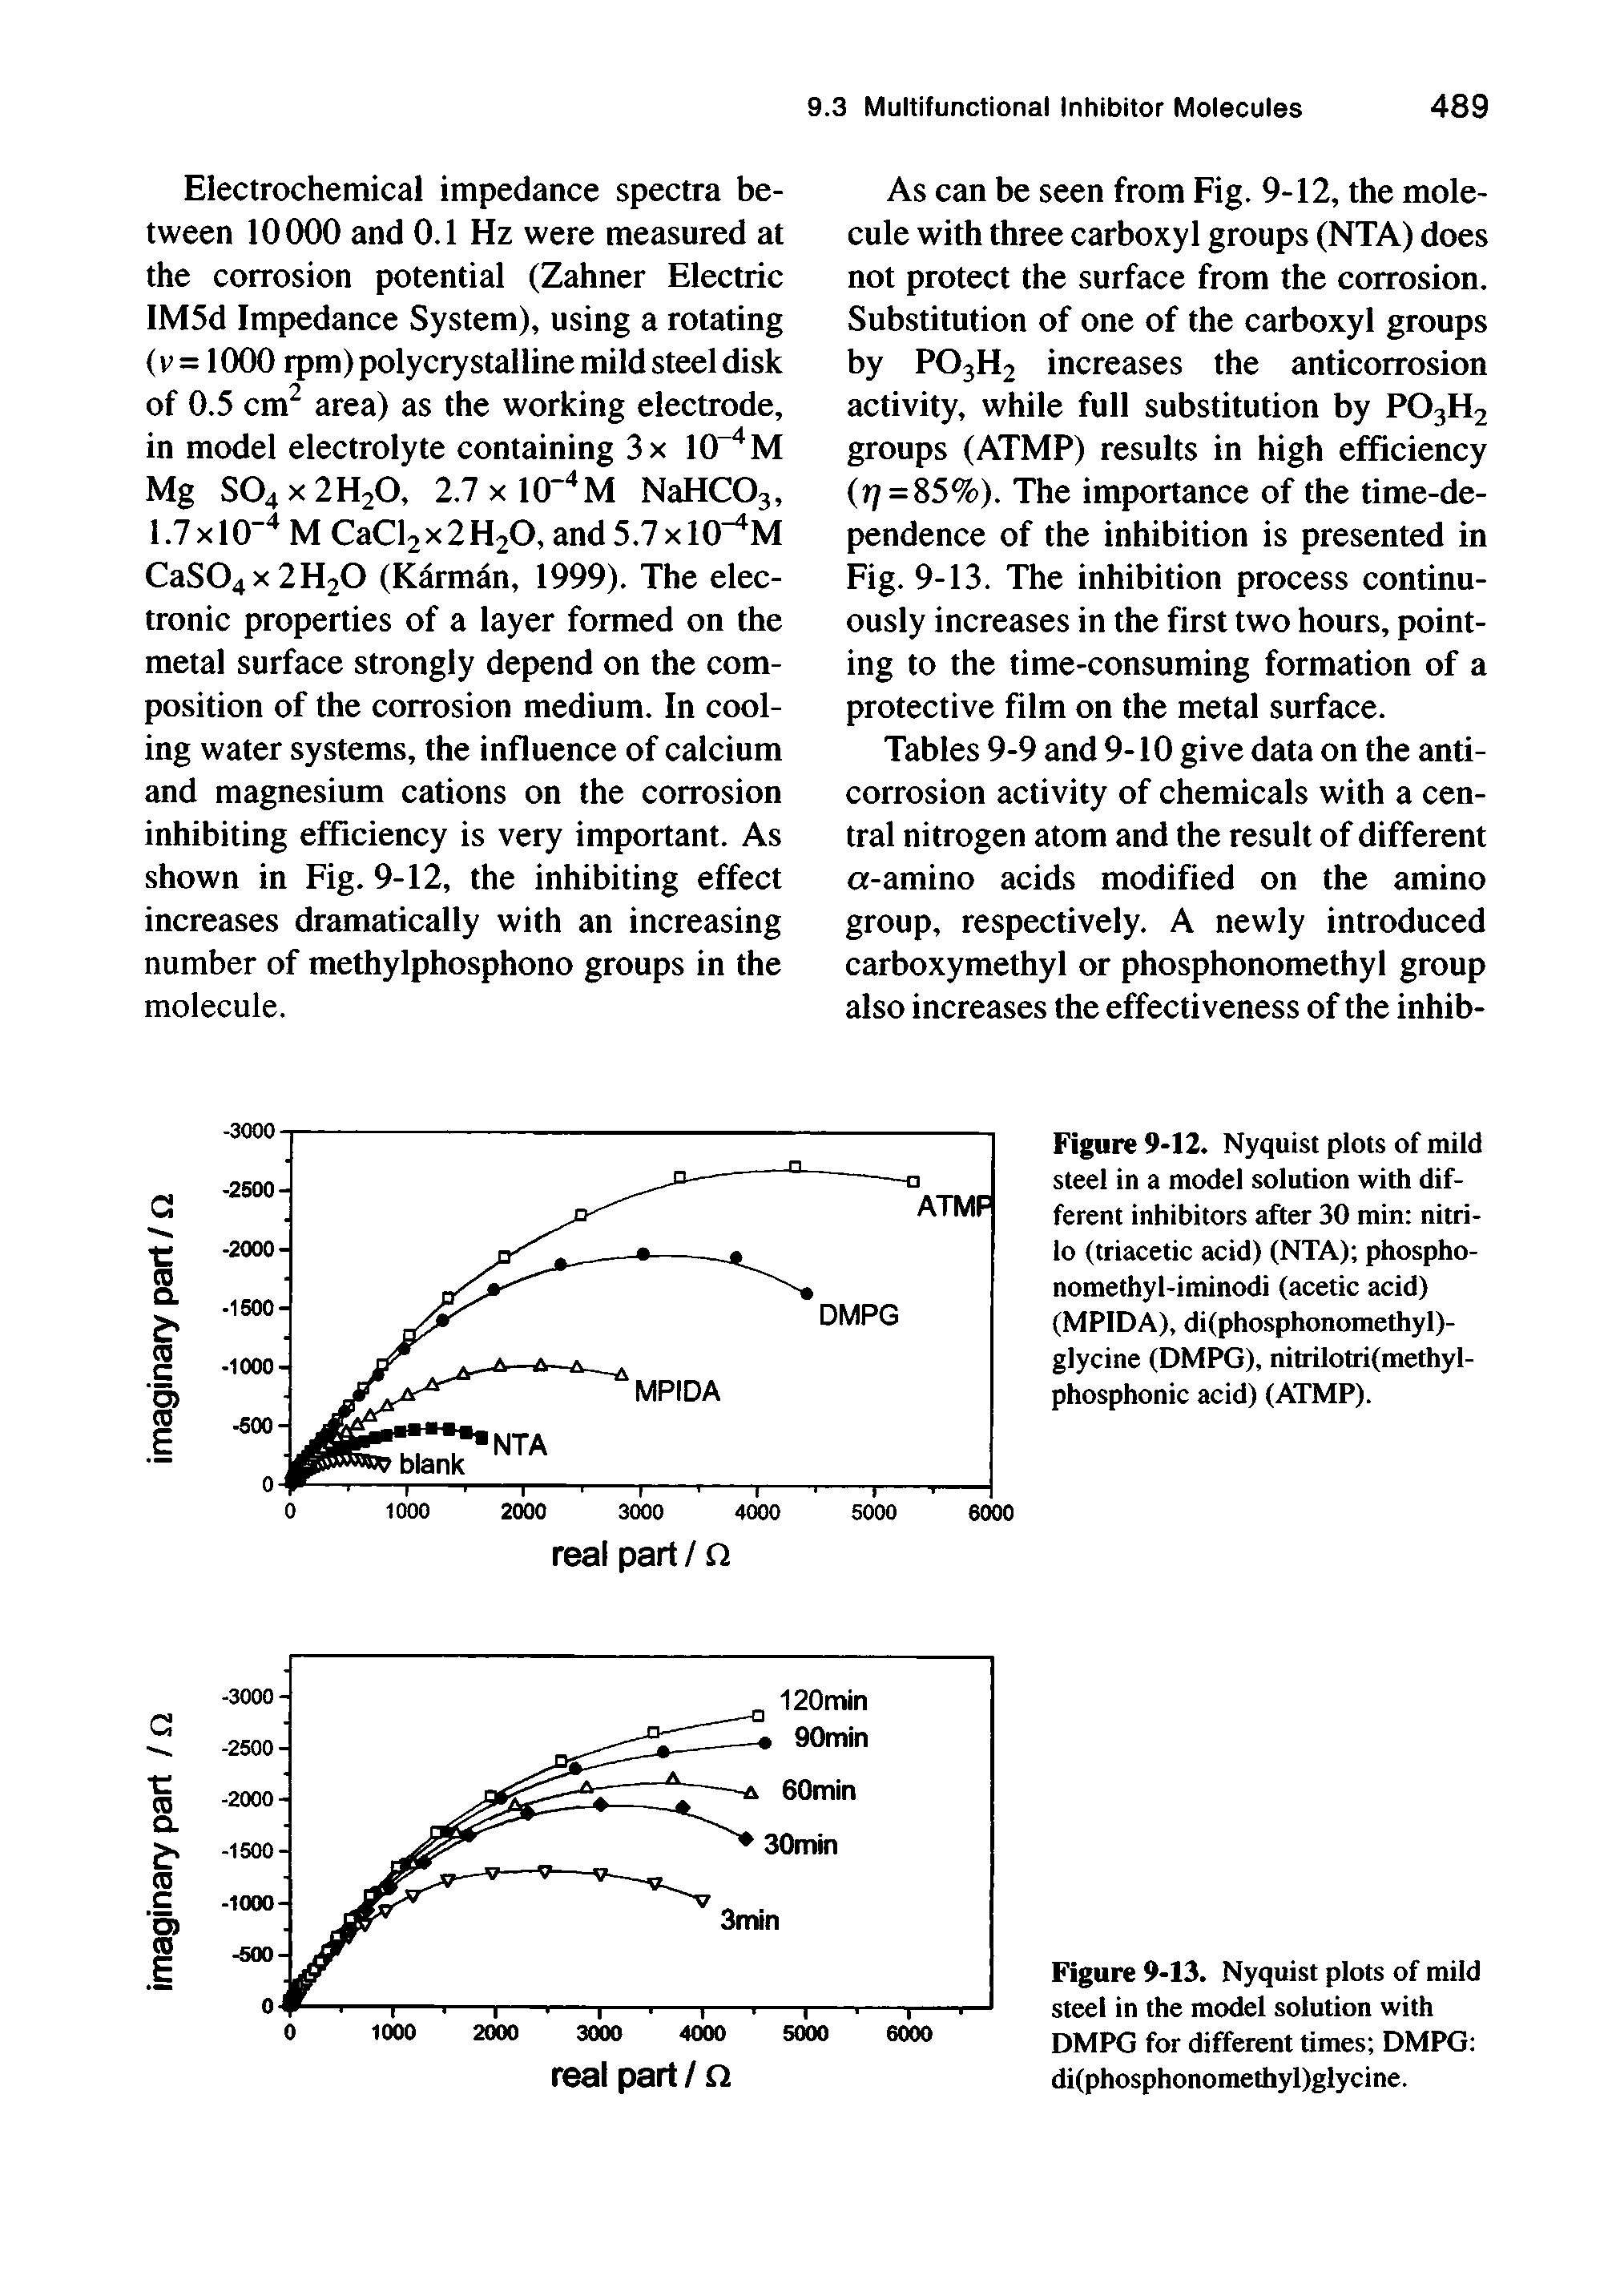 Tables 9-9 and 9-10 give data on the anticorrosion activity of chemicals with a central nitrogen atom and the result of different a-amino acids modified on the amino group, respectively. A newly introduced carboxymethyl or phosphonomethyl group also increases the effectiveness of the inhib-...